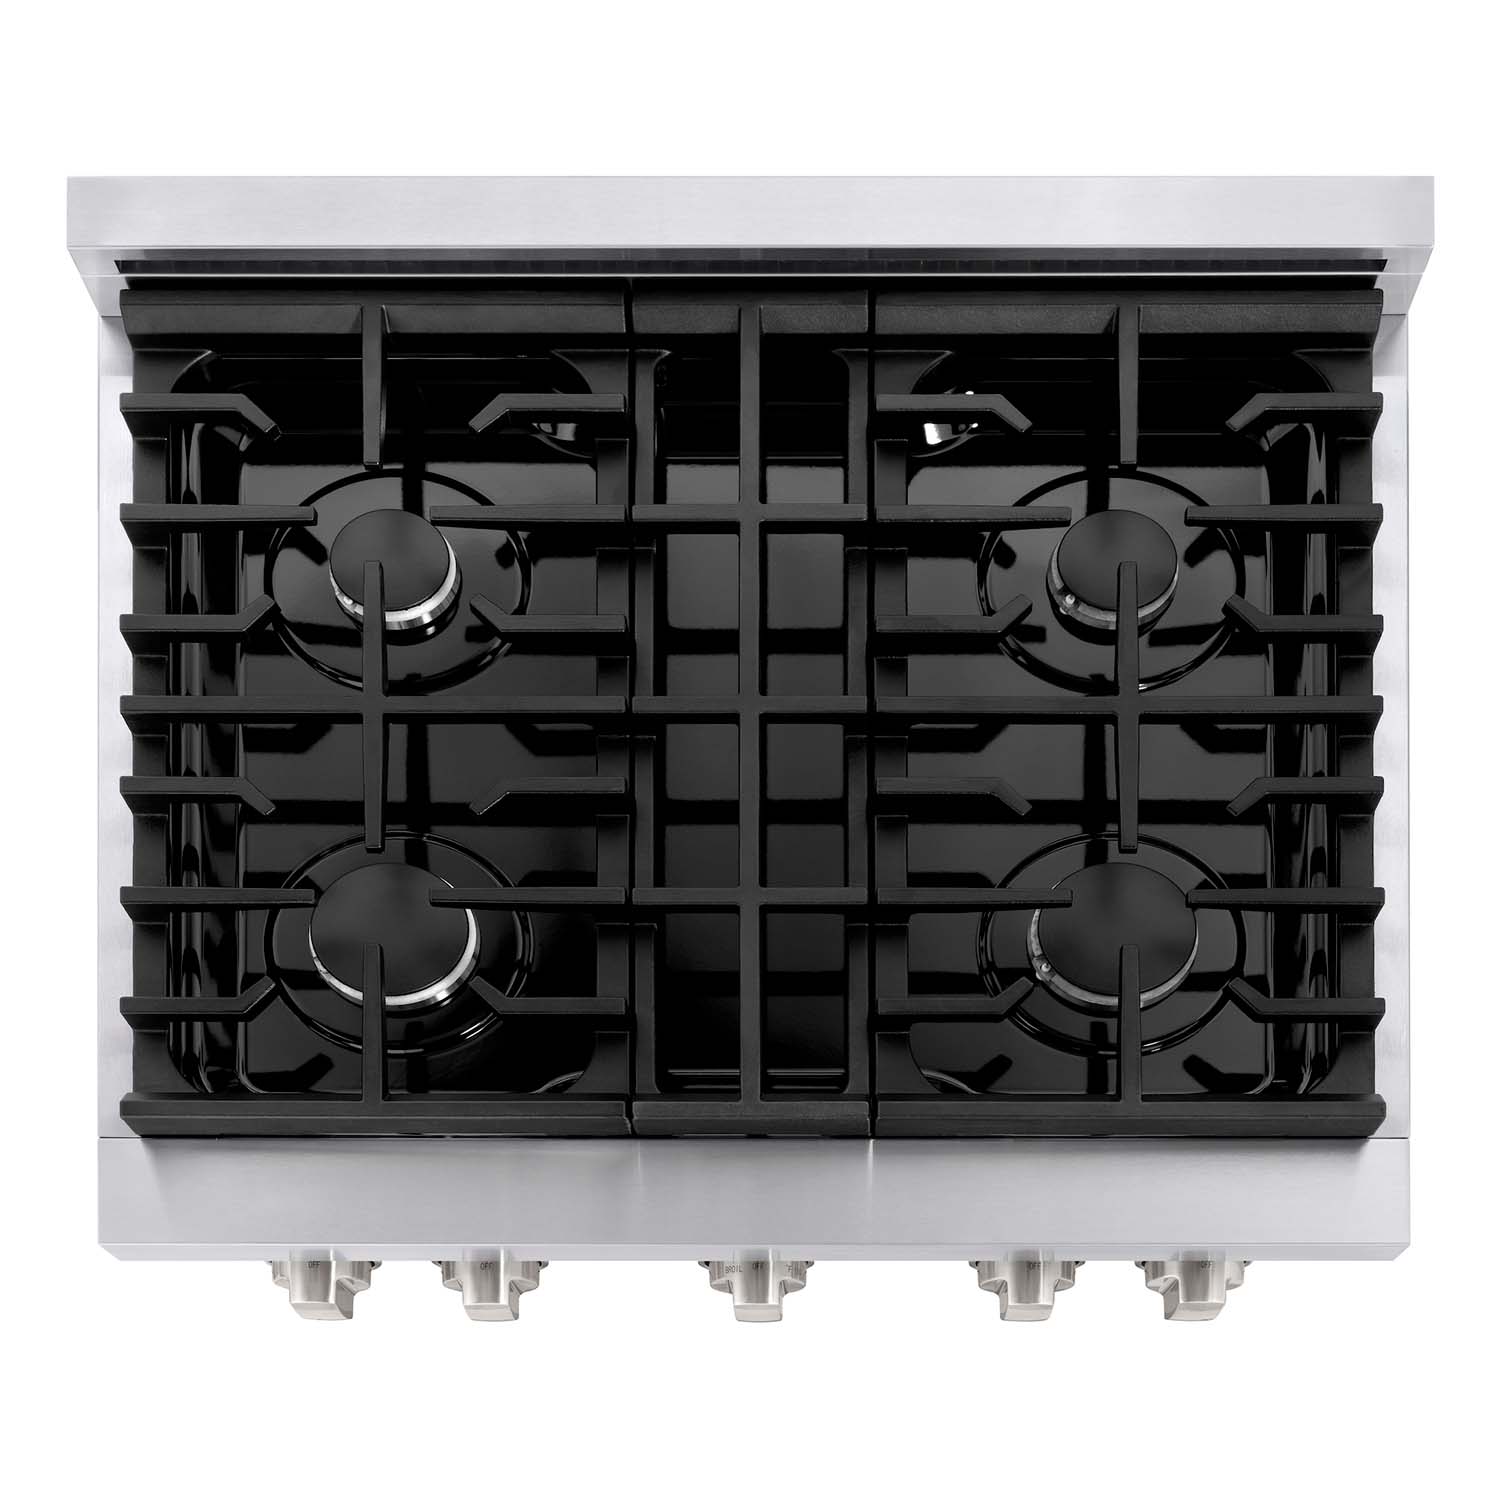 ZLINE 30 in. 4.2 cu. ft. 4 Burner Gas Range with Convection Gas Oven in Stainless Steel (SGR30) from above, showing gas burners, black porcelain cooktop, and cast-iron grates.